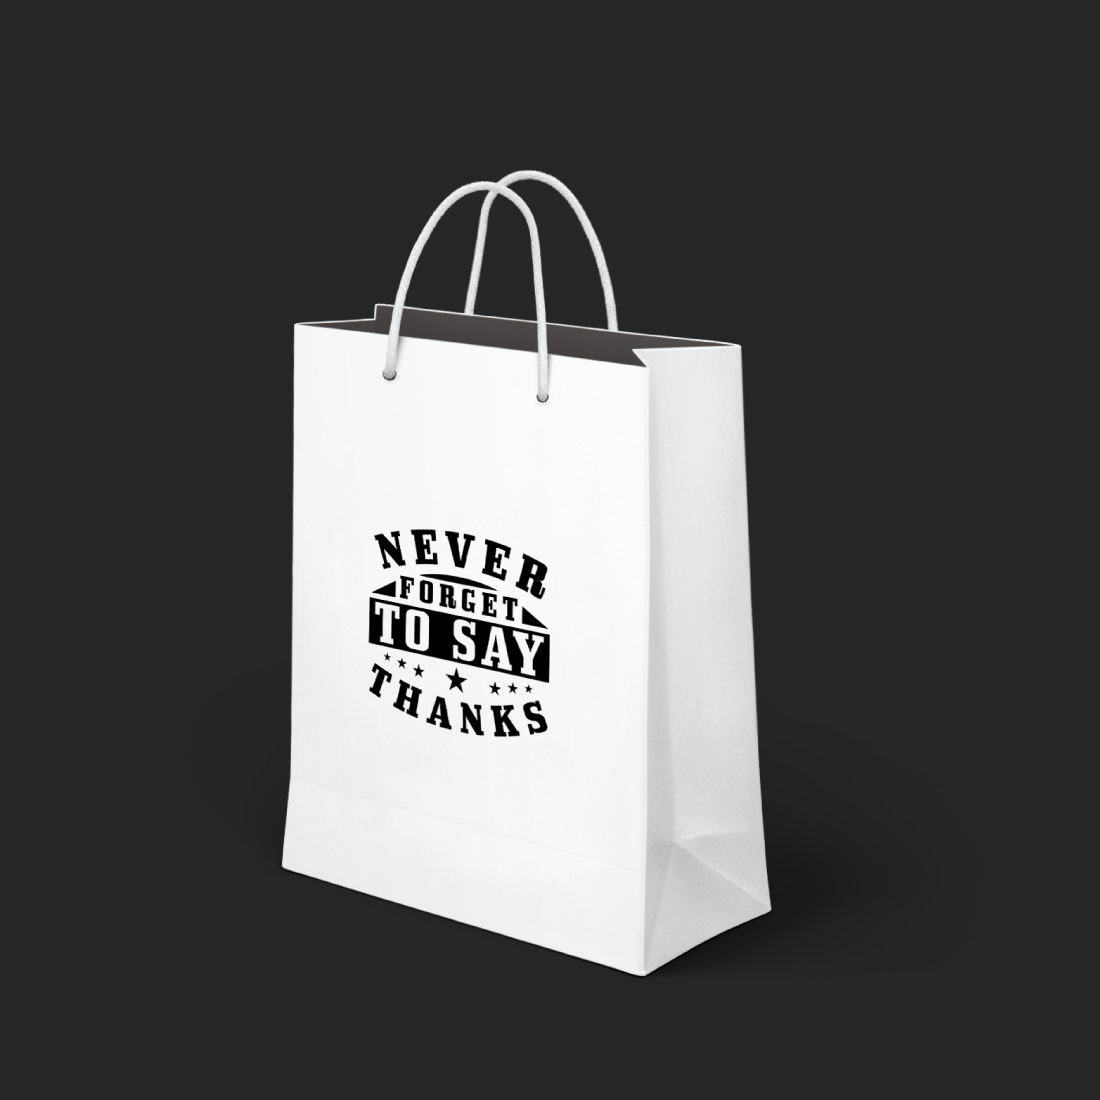 never forget to say thanks bag design 364